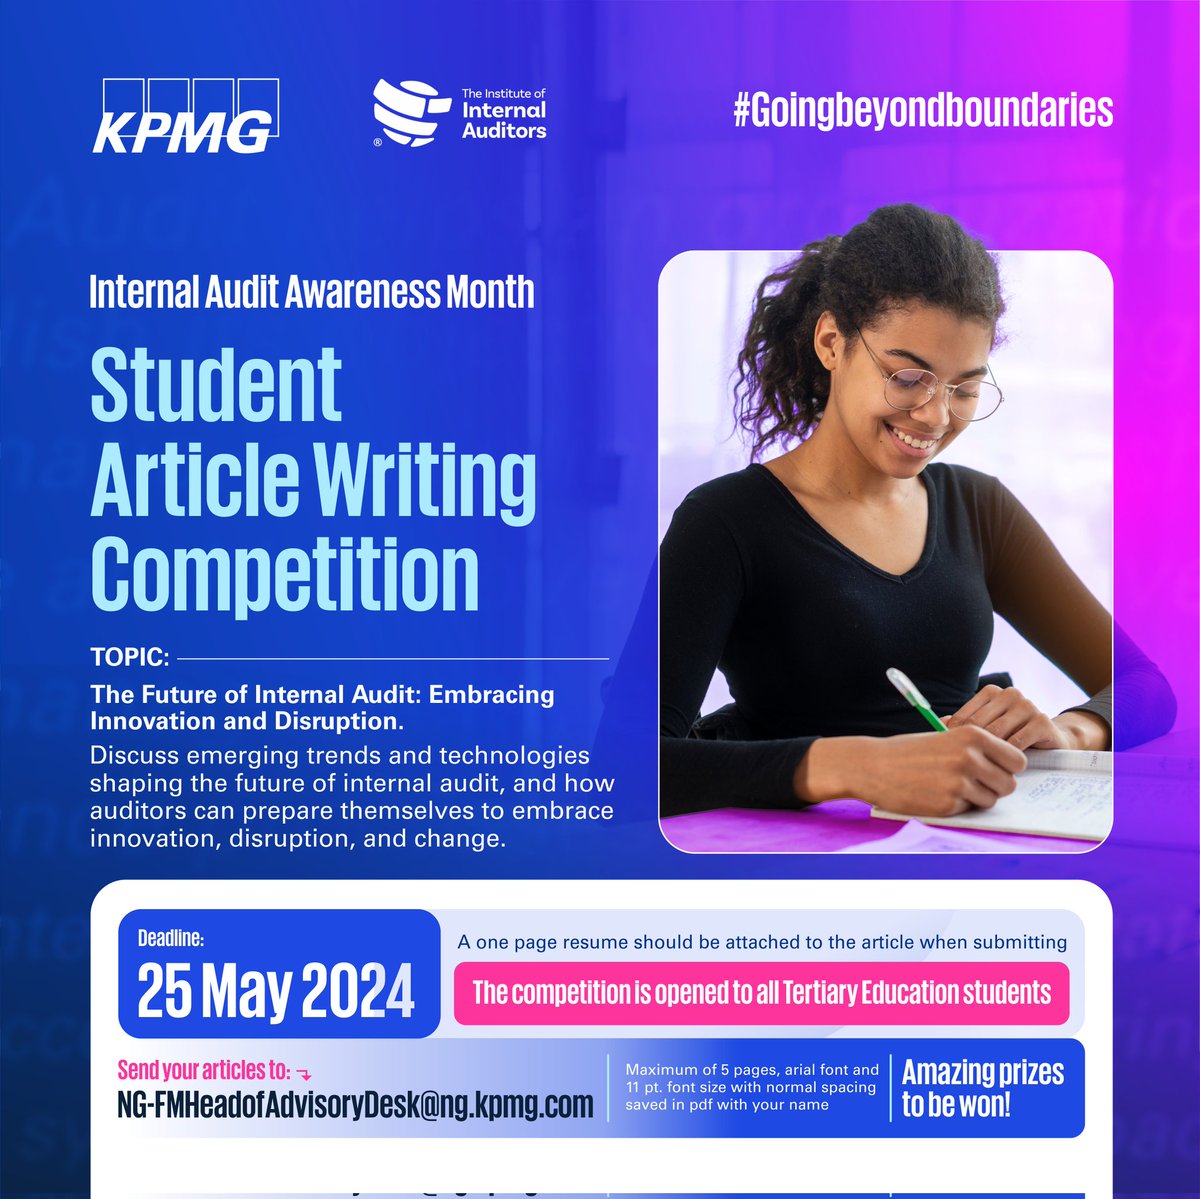 Thrilled to announce that submissions are now open for the Internal Audit Student Article Writing Competition. Deadline: 25 May 2024 Send your articles to the following email: NG-FMHeadofAdvisoryDesk@ng.kpmg.com Don't miss this chance to win exciting prizes. #InternalAudit